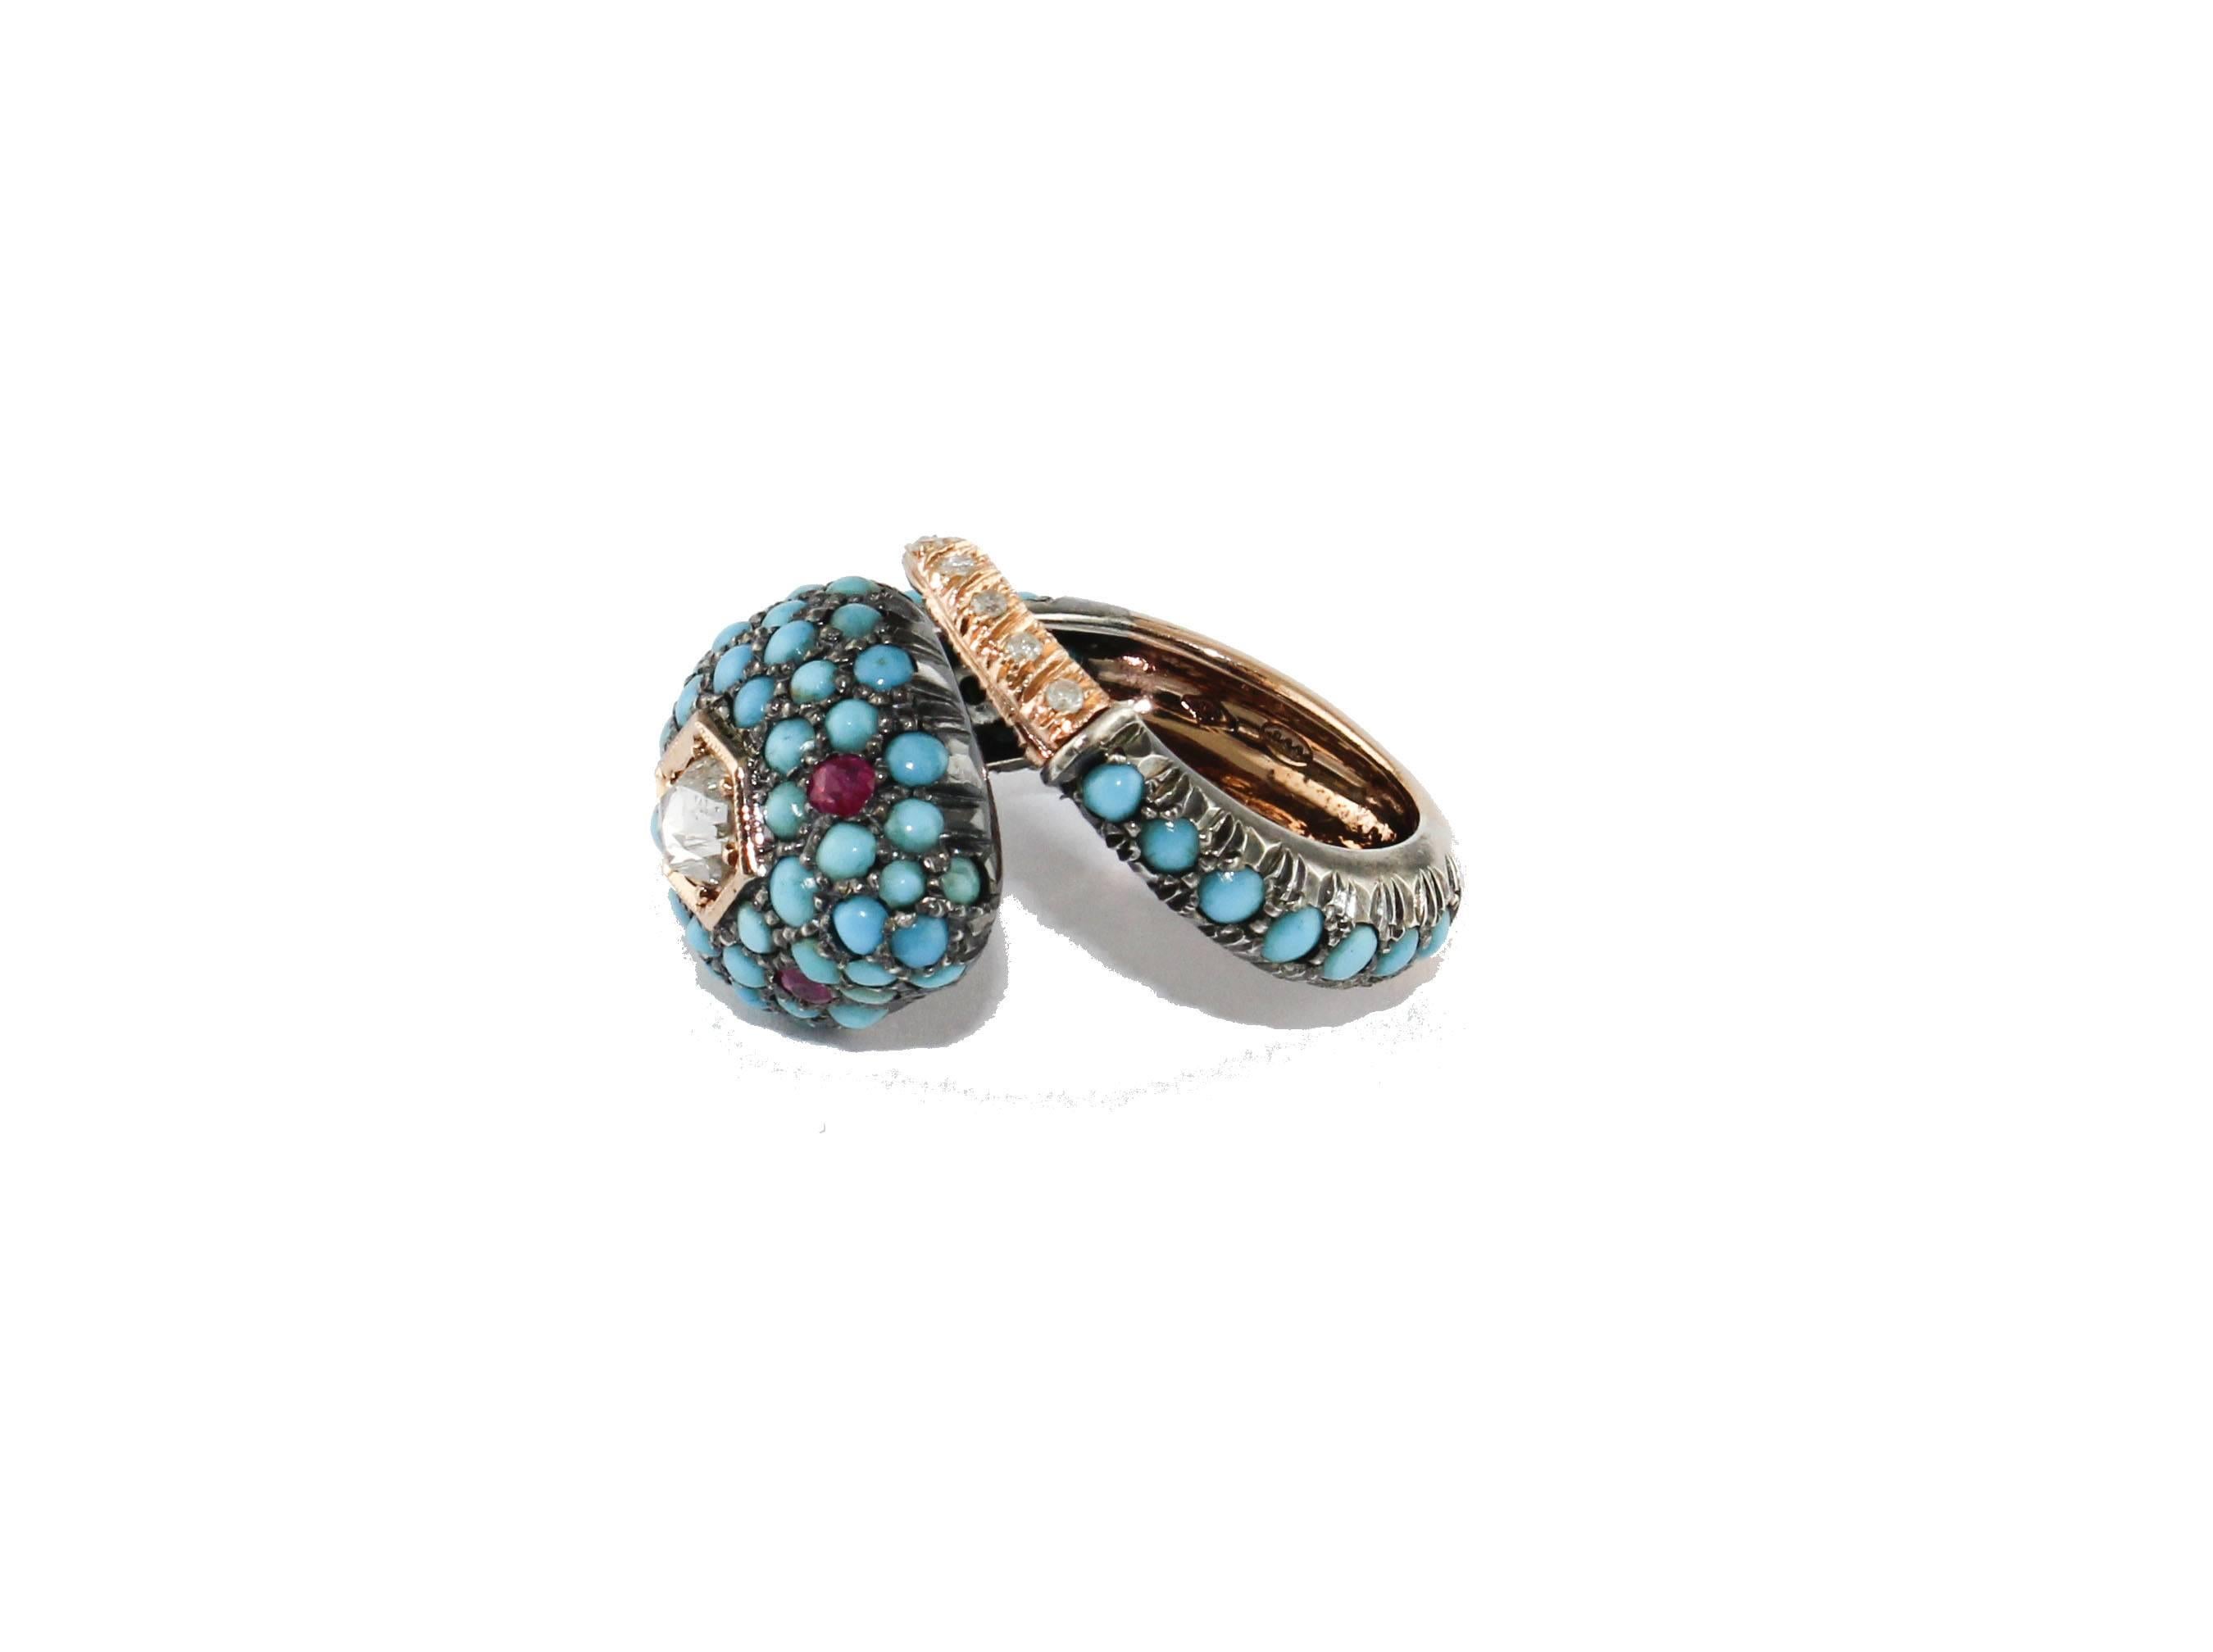 A particular snake-shaped ring in 9kt rose gold, studded with turquoise stones of 0.77 g, 0.18 ct rubies and a 0.85 ct central diamond, which gives a lot of light to this beautiful ring with a total weight of g 7.77.
Diamonds ct 0.85
Turquoise g